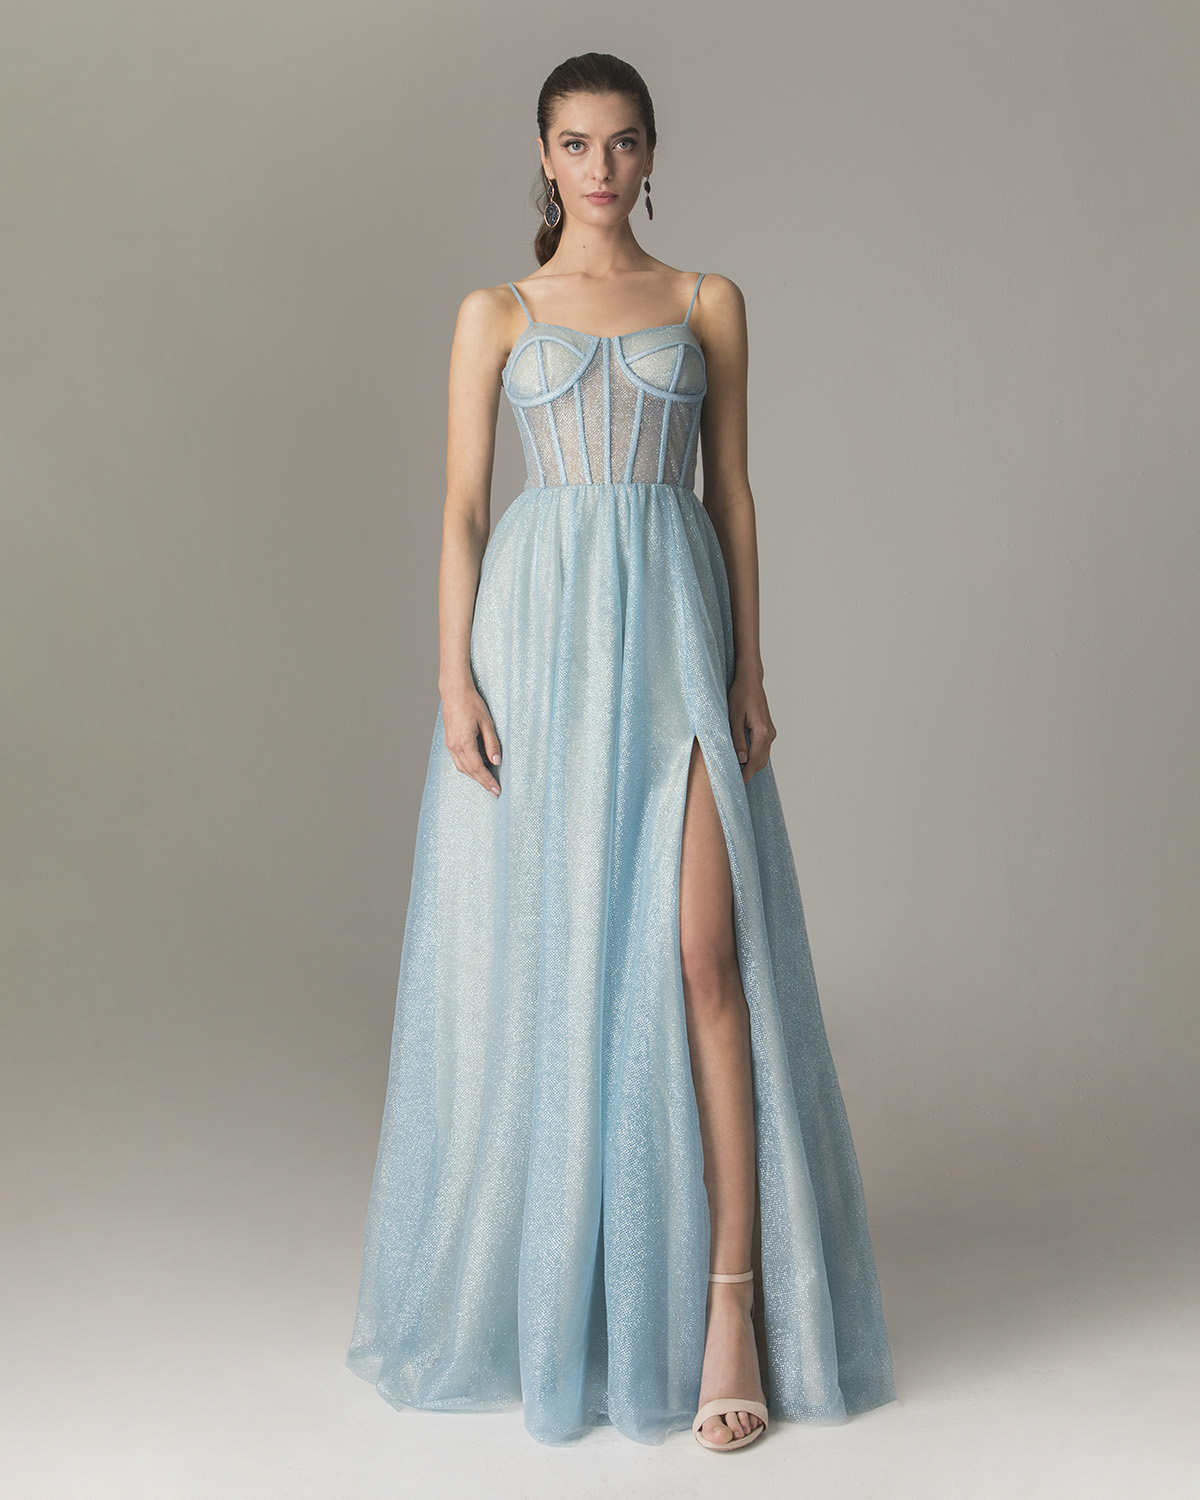 Cocktail Dresses / Long dress with shining fabric